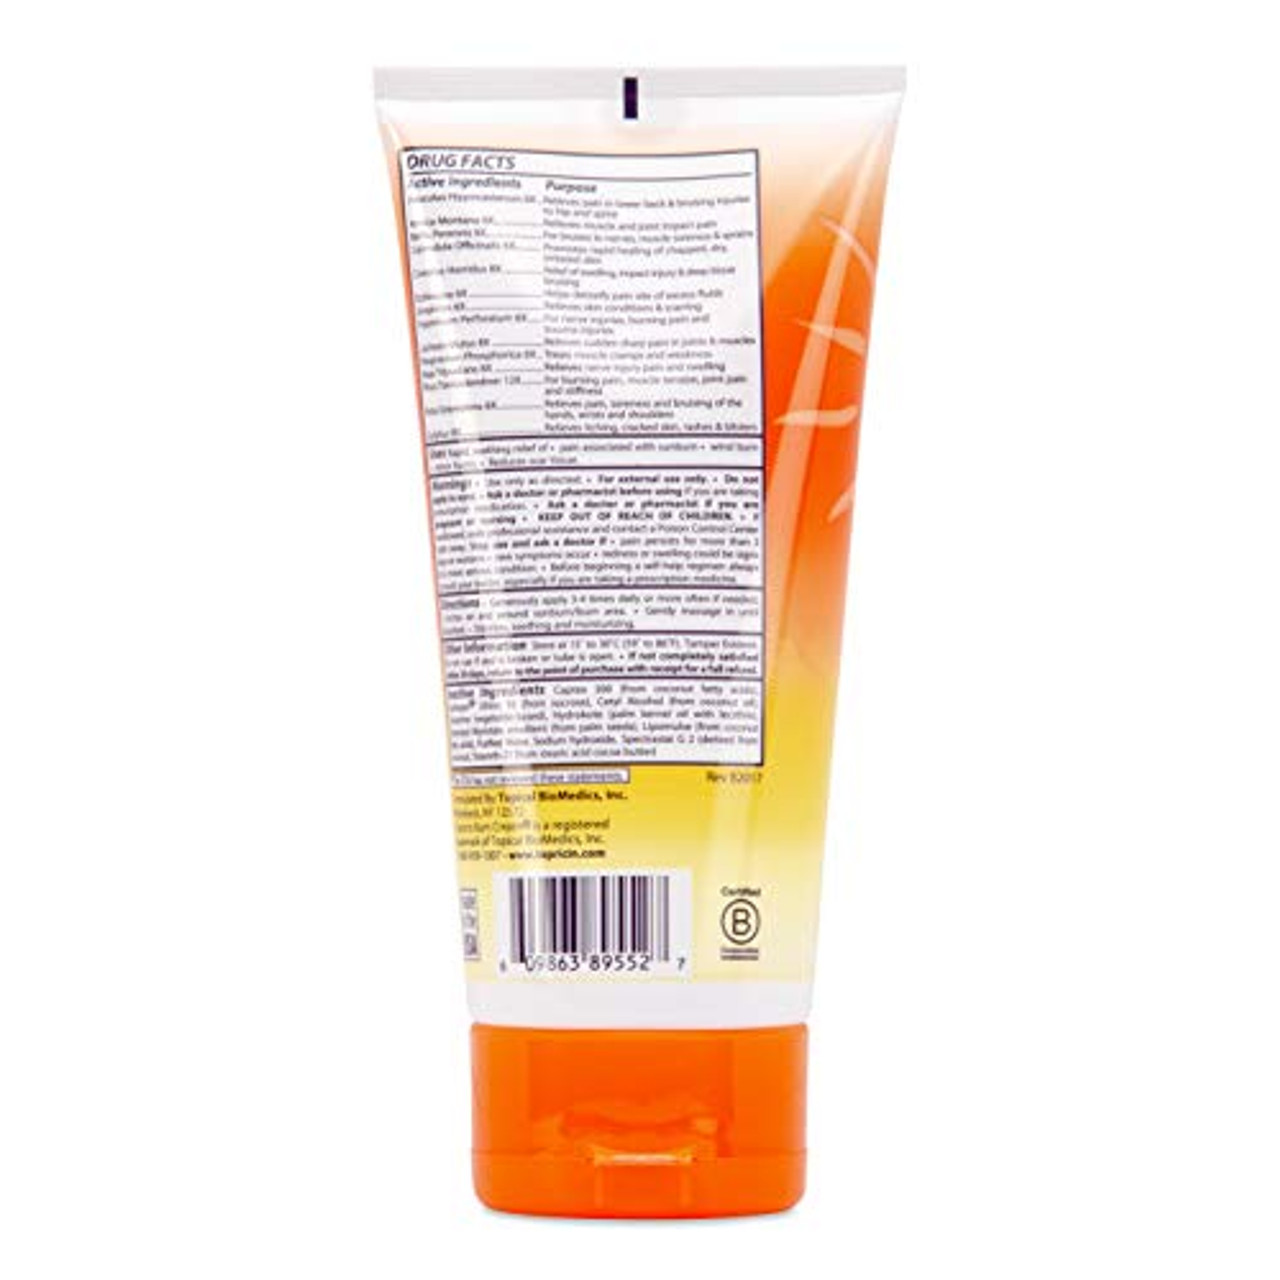 Topricin Afterburn Cream Fast Acting After Burn Lotion For Sunburn And Other Burns 4669